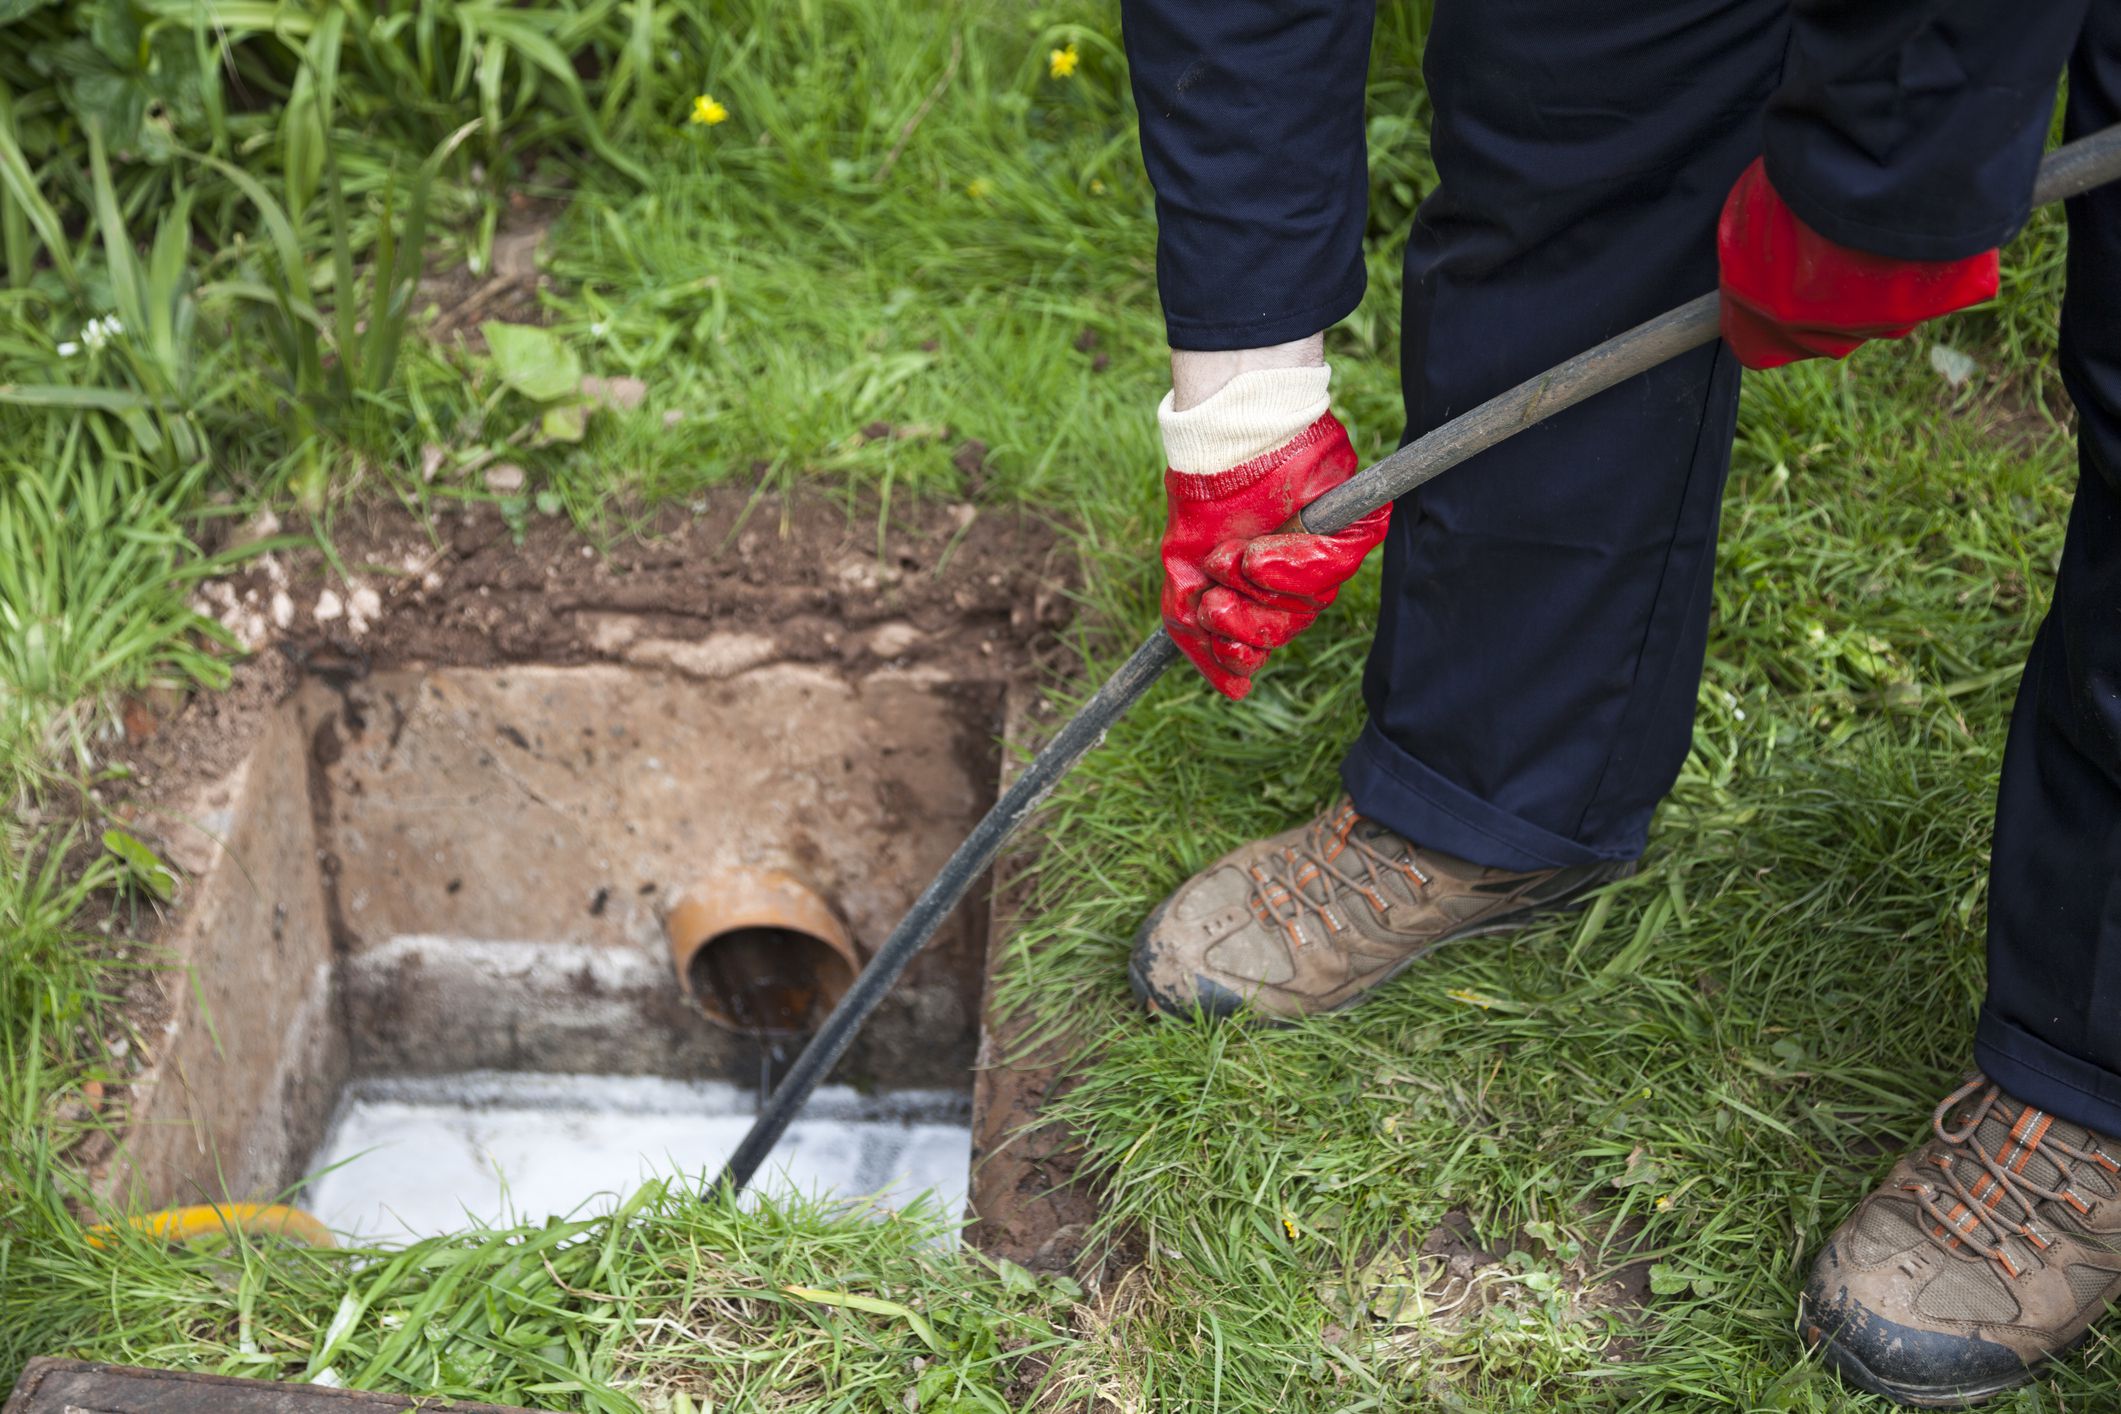 sewer drains should